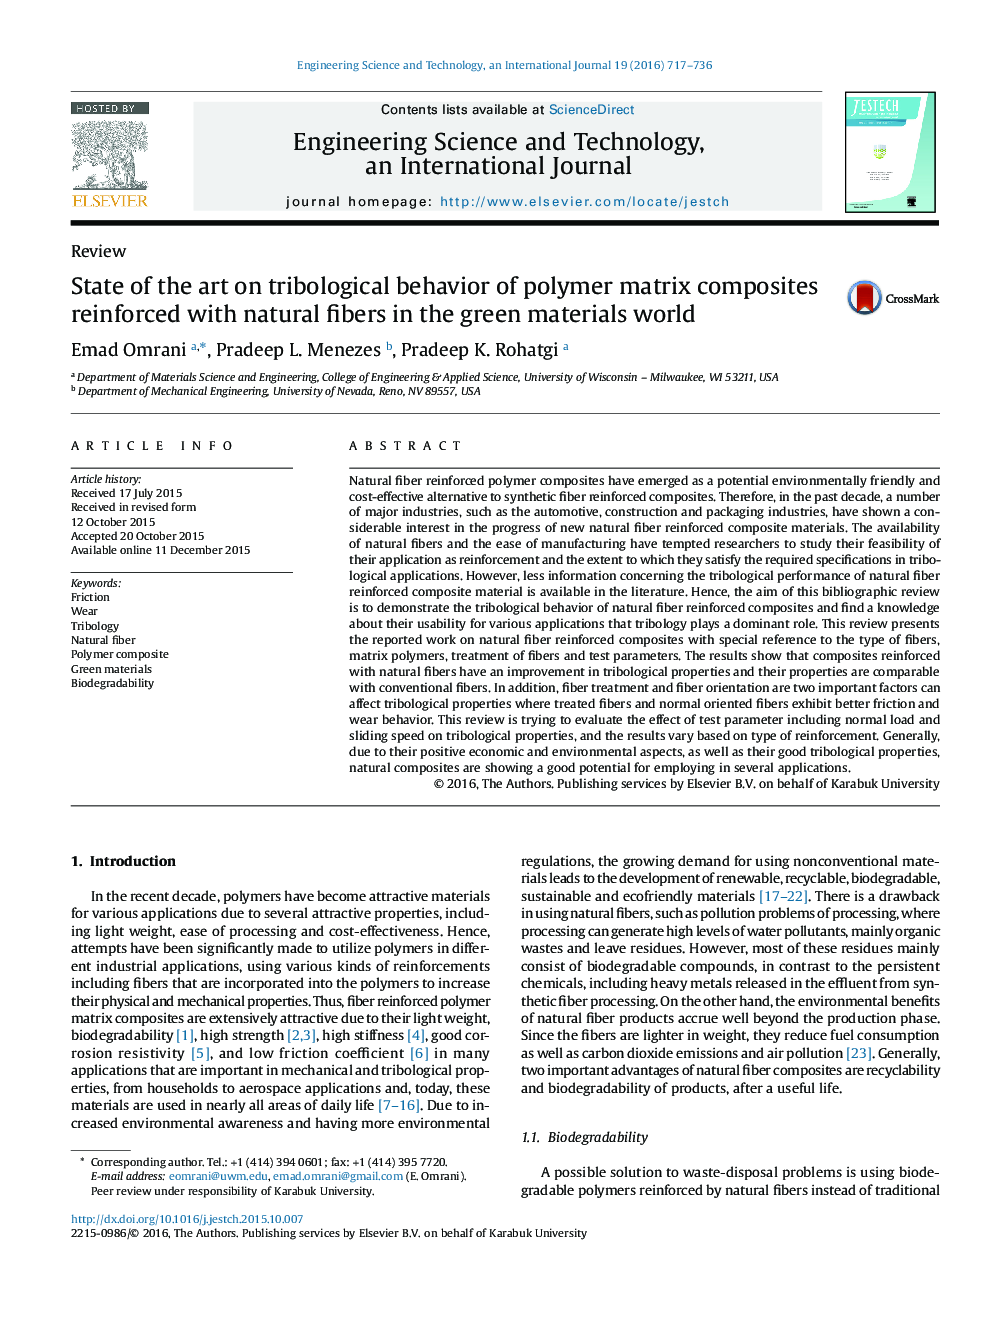 State of the art on tribological behavior of polymer matrix composites reinforced with natural fibers in the green materials world 